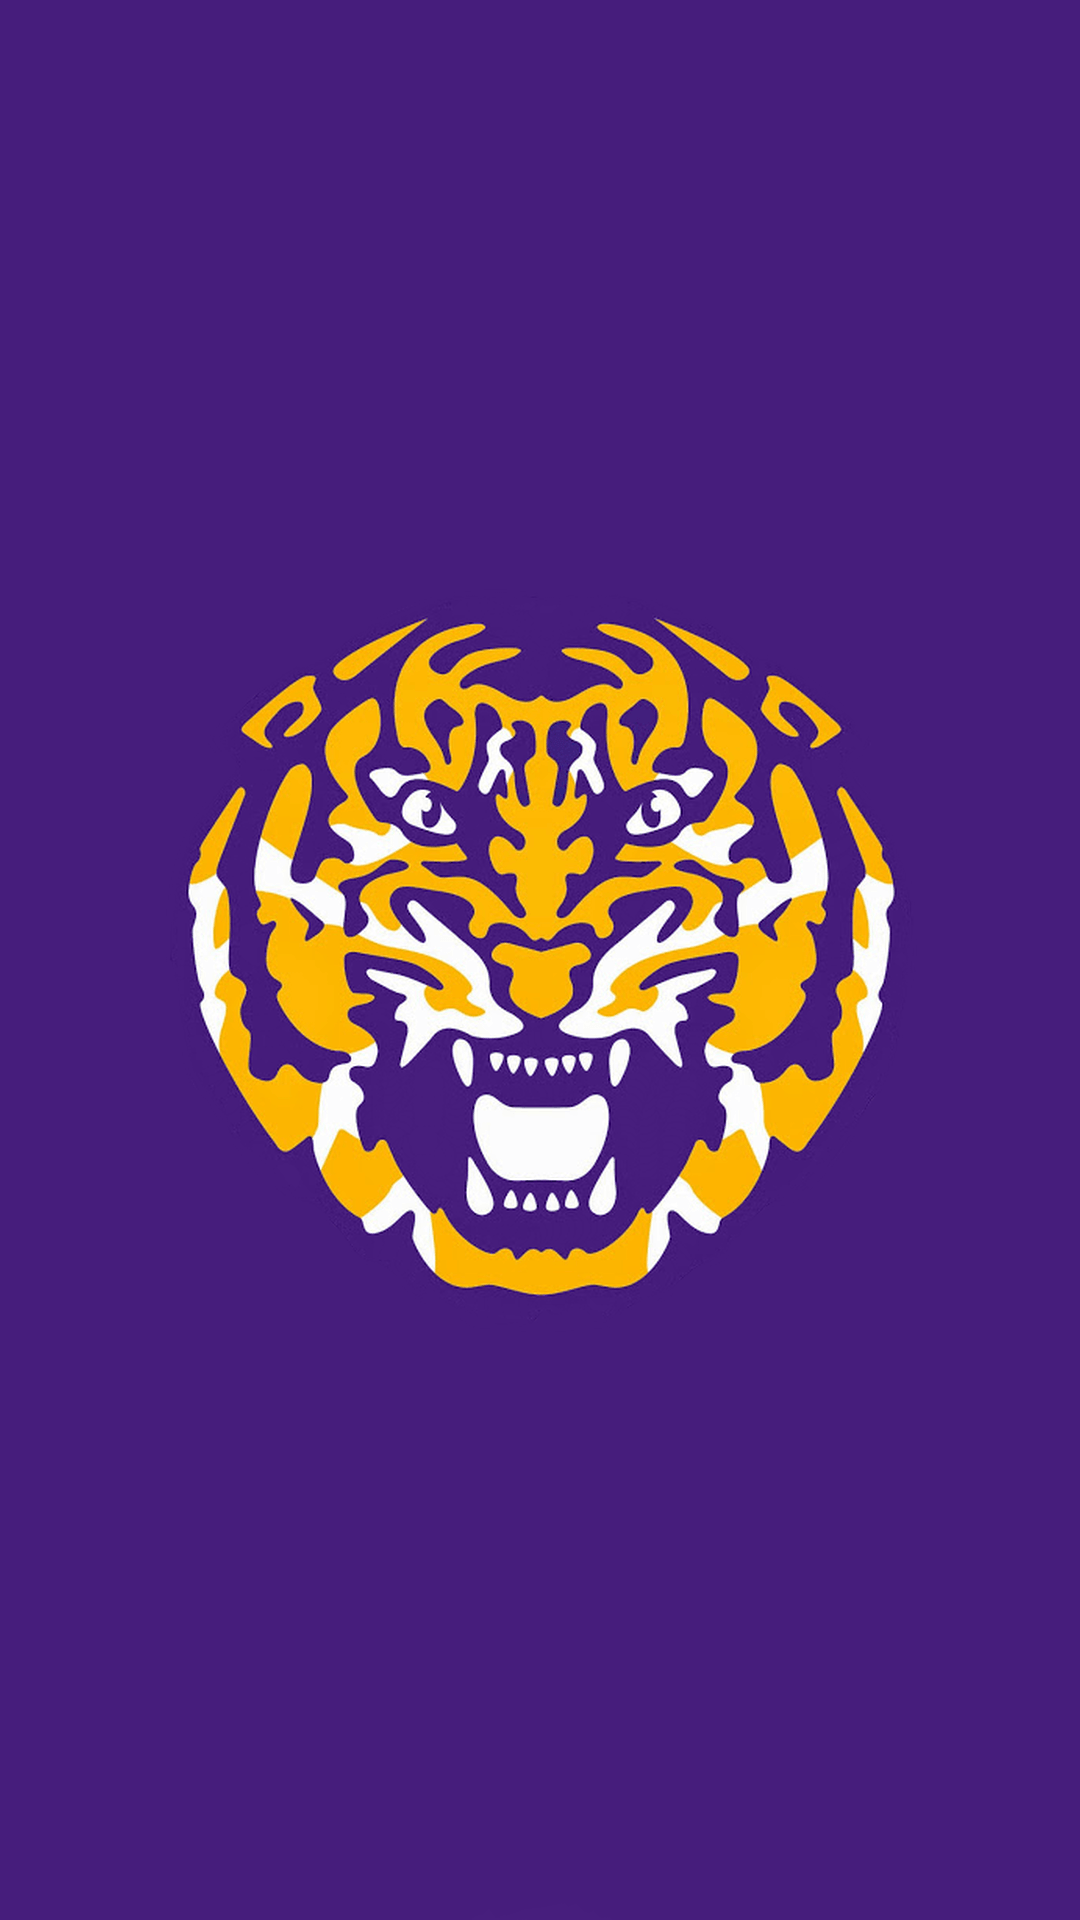 Lsu Wallpapers 60 images